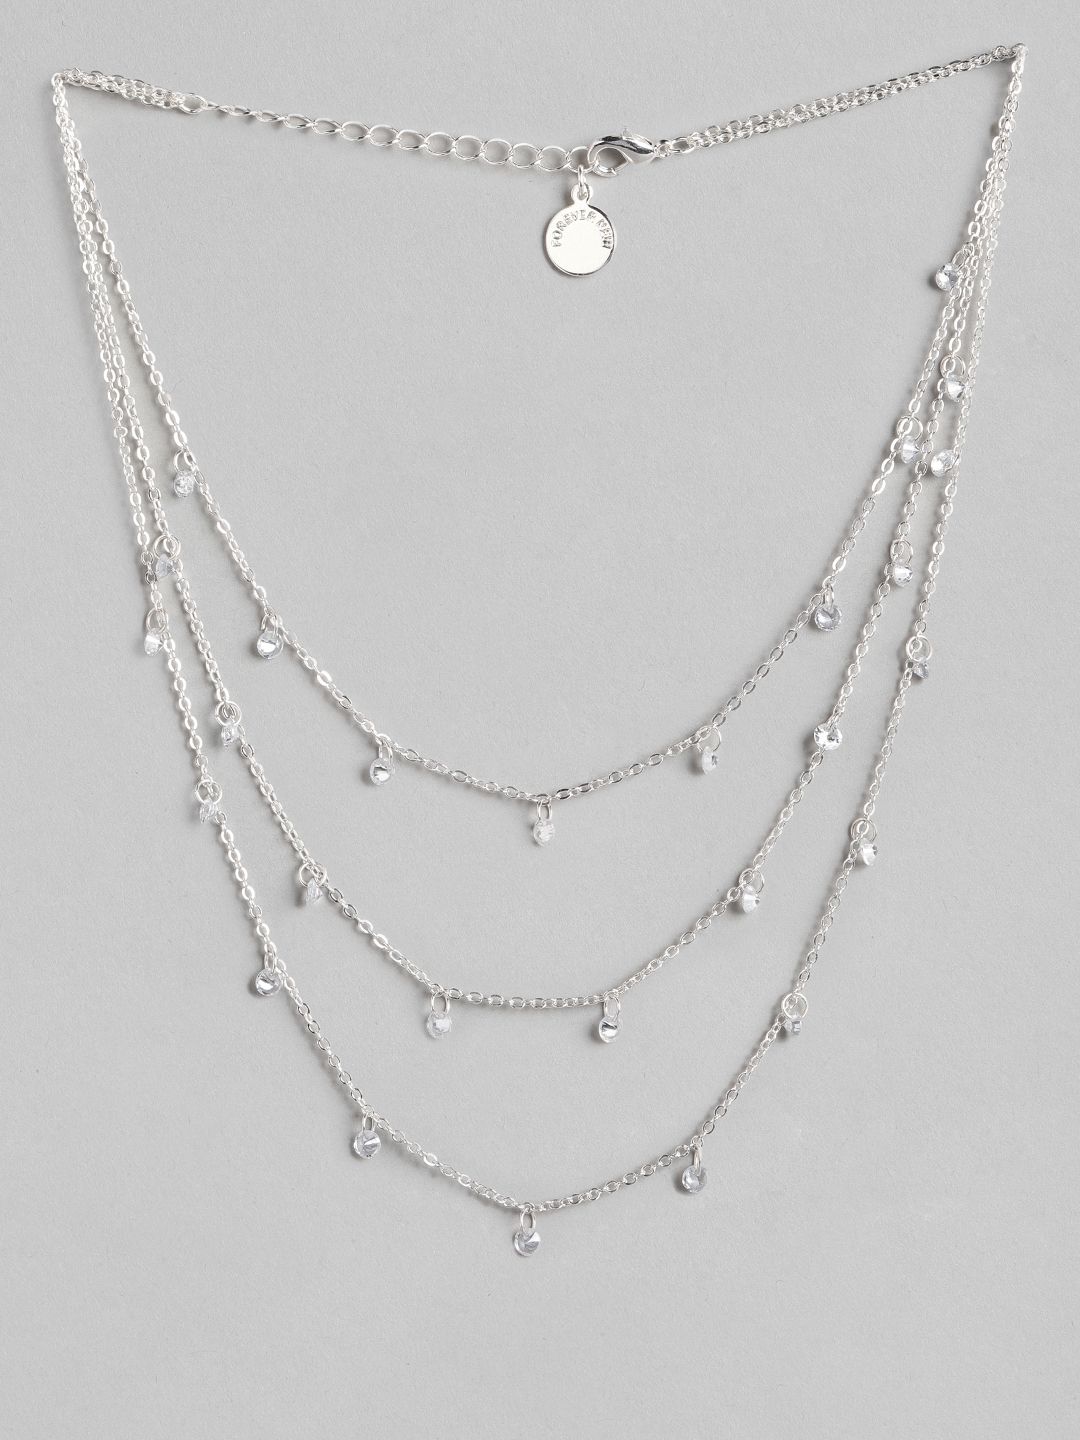 Forever New Silver-Toned Silver-Plated Layered Necklace Price in India